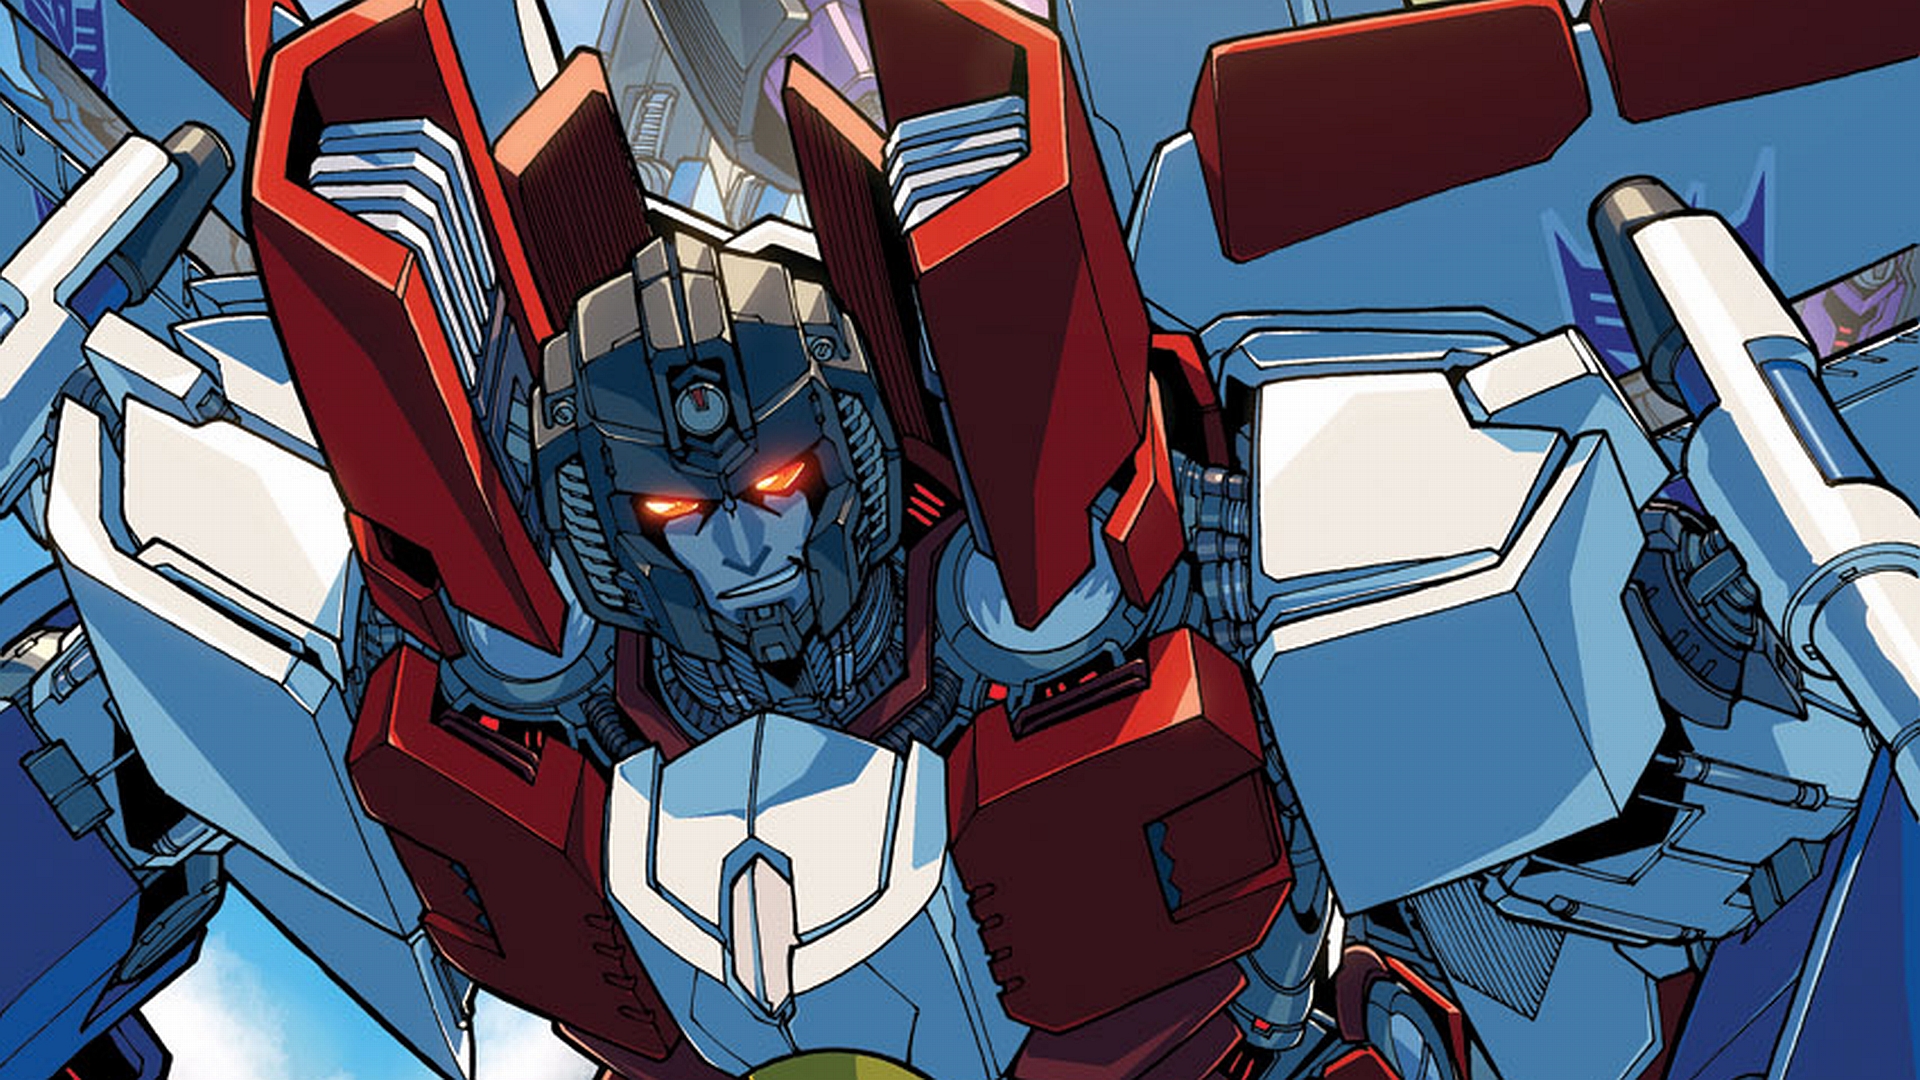 Comic book lovers will enjoy this Transformers wallpaper.